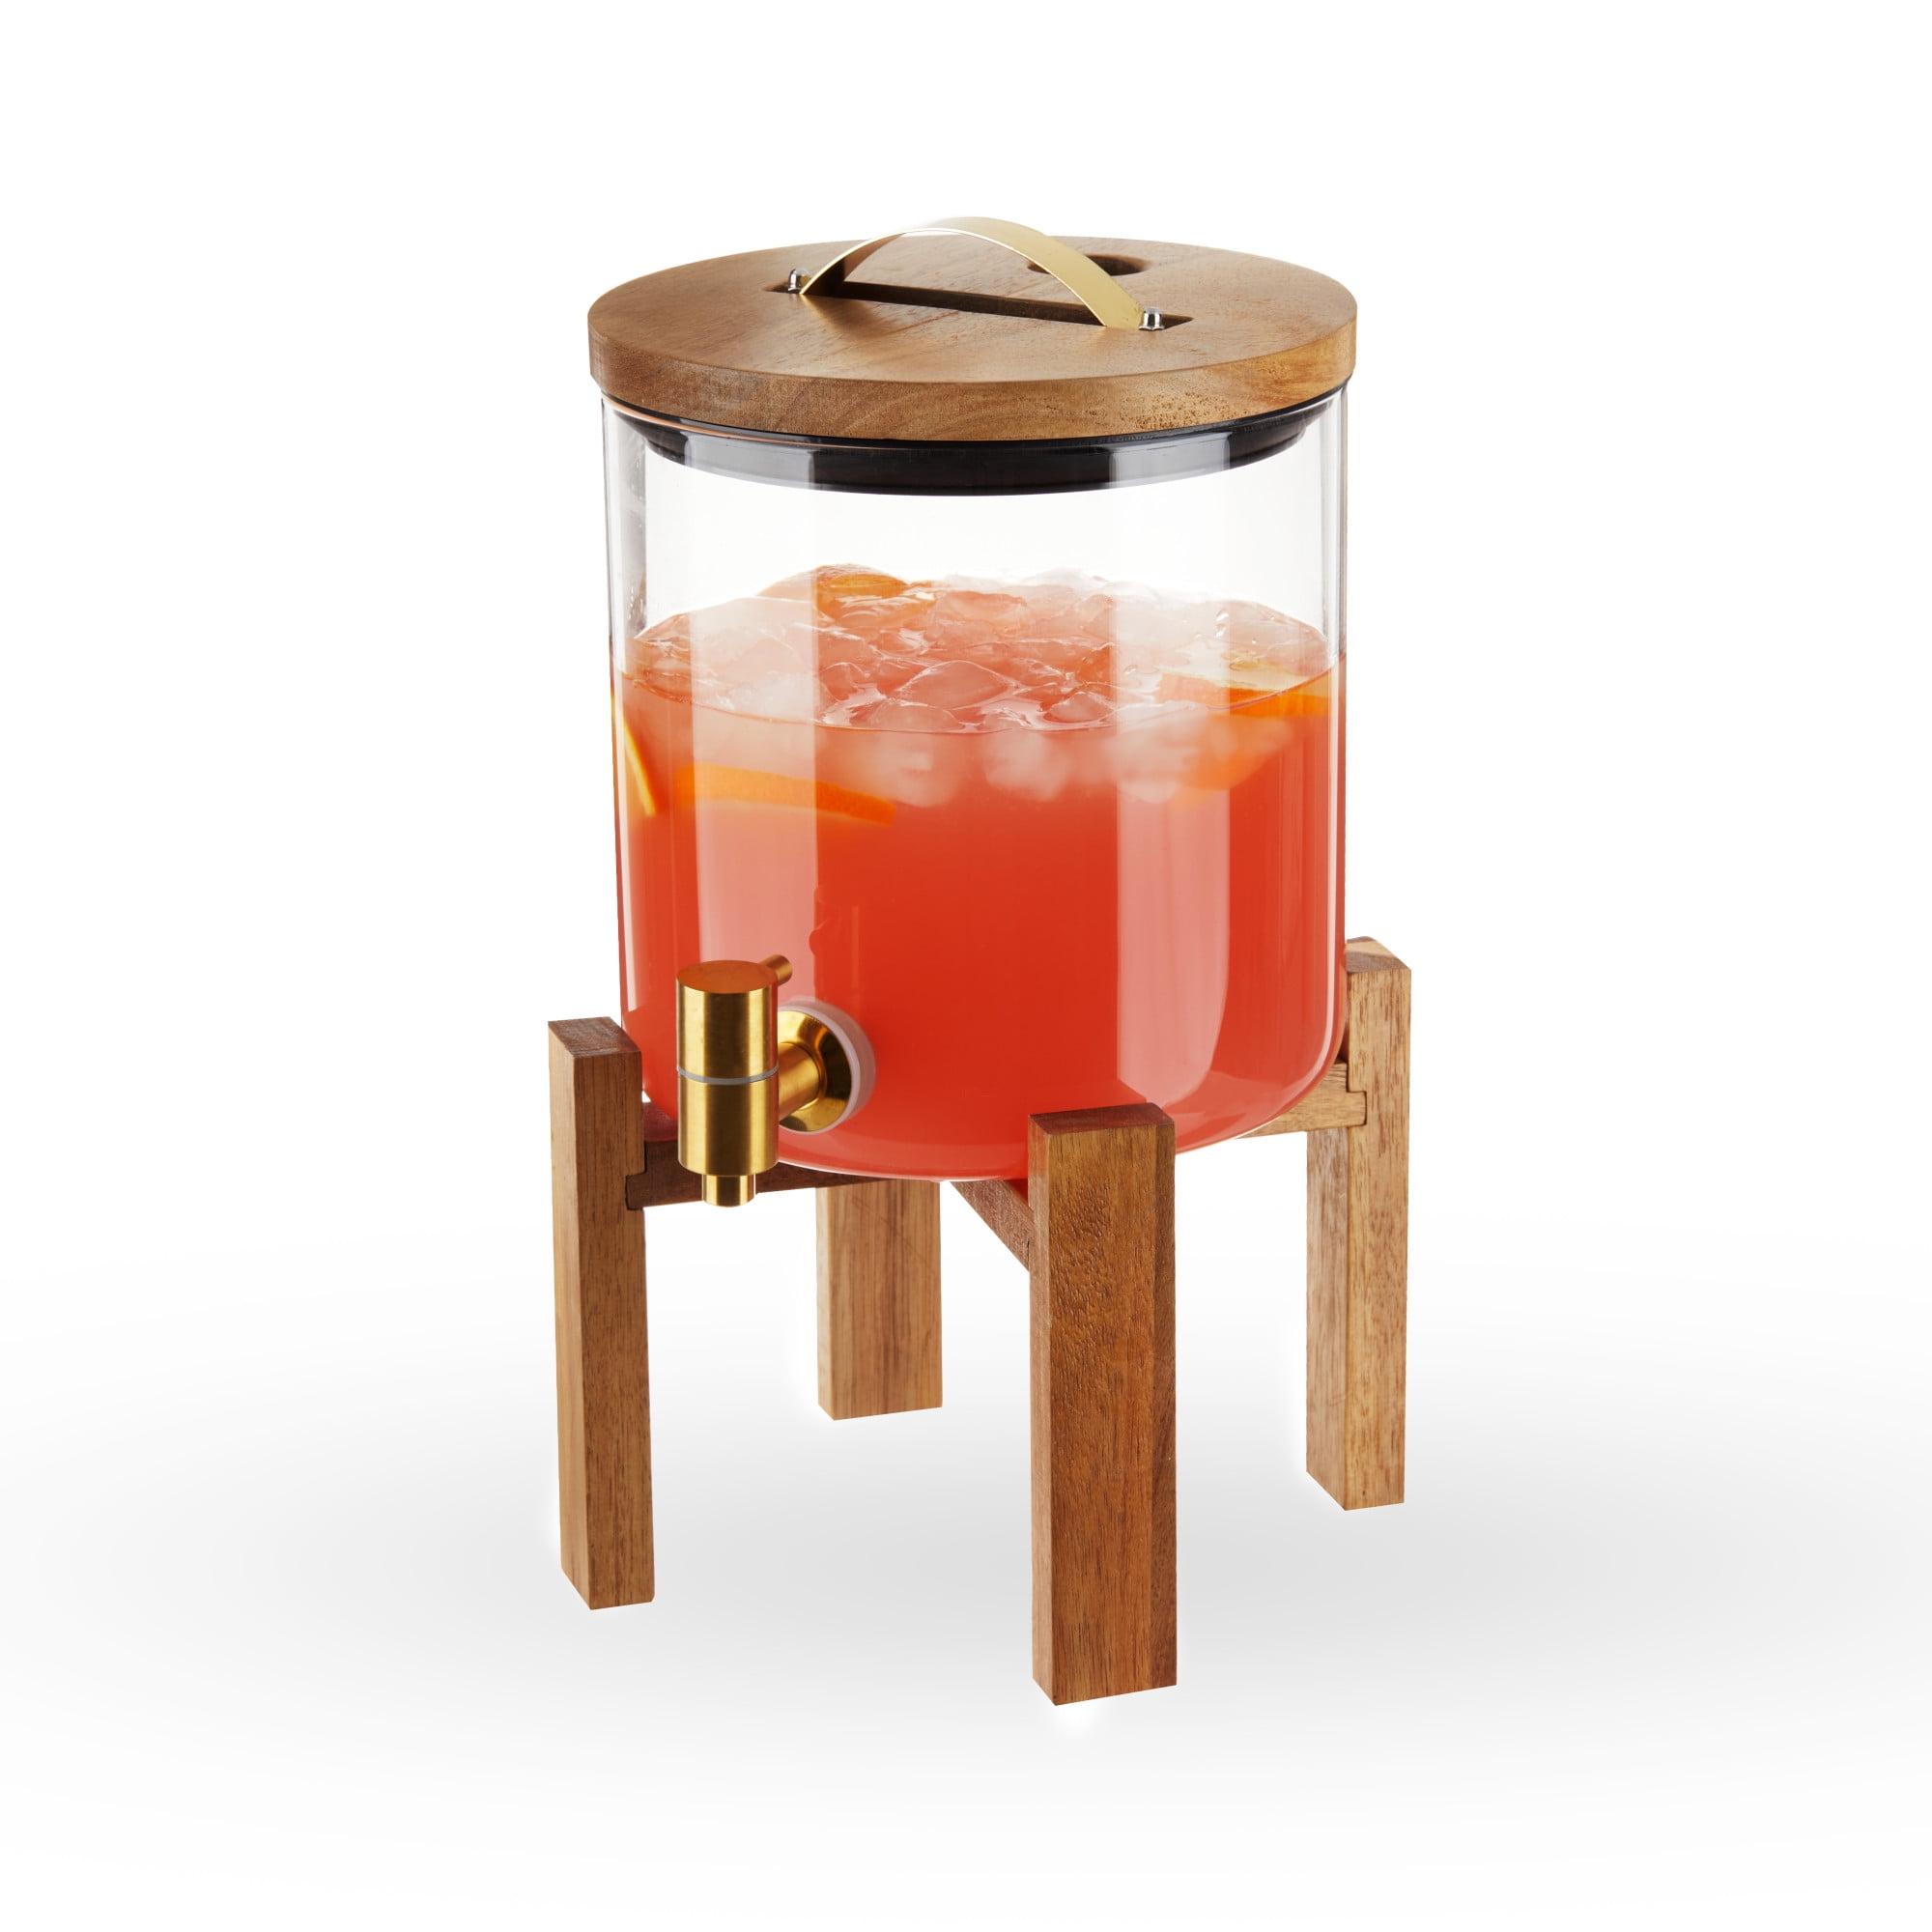 1 Gallon Glass Beverage Dispenser with Wood Stand, Wanik Water Drink  Dispenser for Parties with Stainless Steel Spigot, Glass Jar Beverage  Dispensers for Weddings, Sun Tea & Lemonade Dispenser.. ($35.99) For